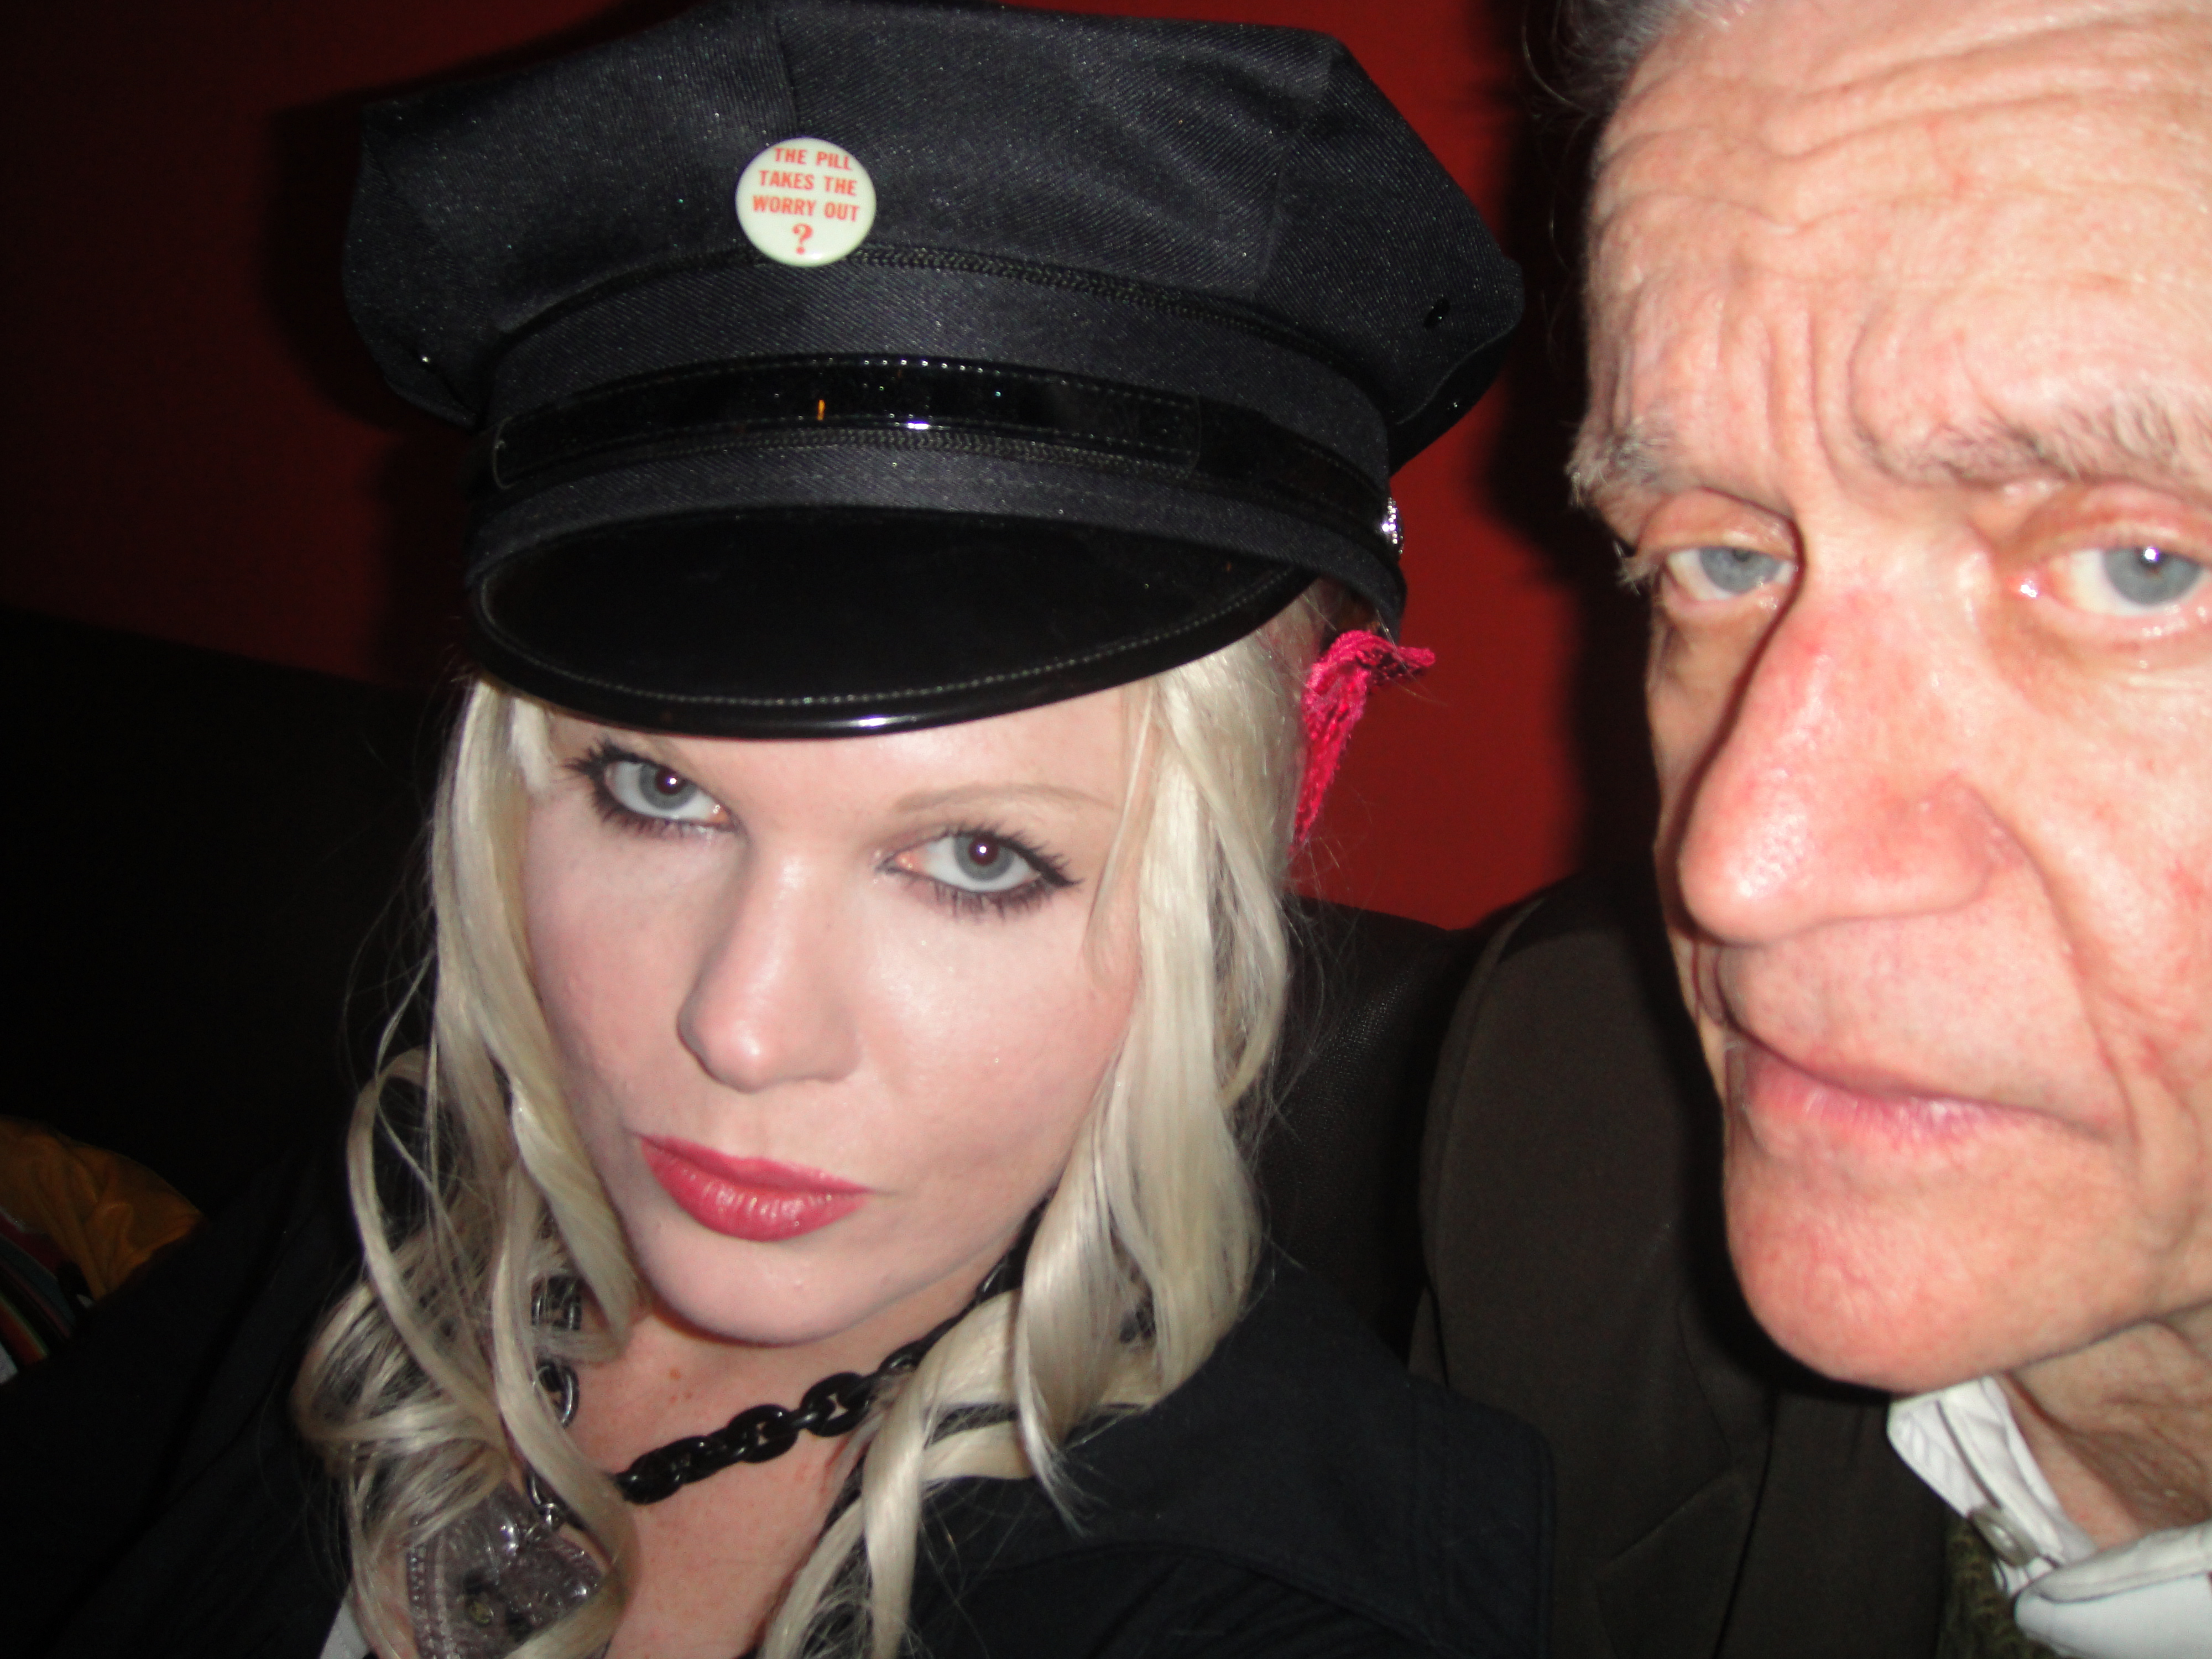 GIDDLE PARTRIDGE & LEGENDARY RECORD PRODUCER KIM FOWLEY.